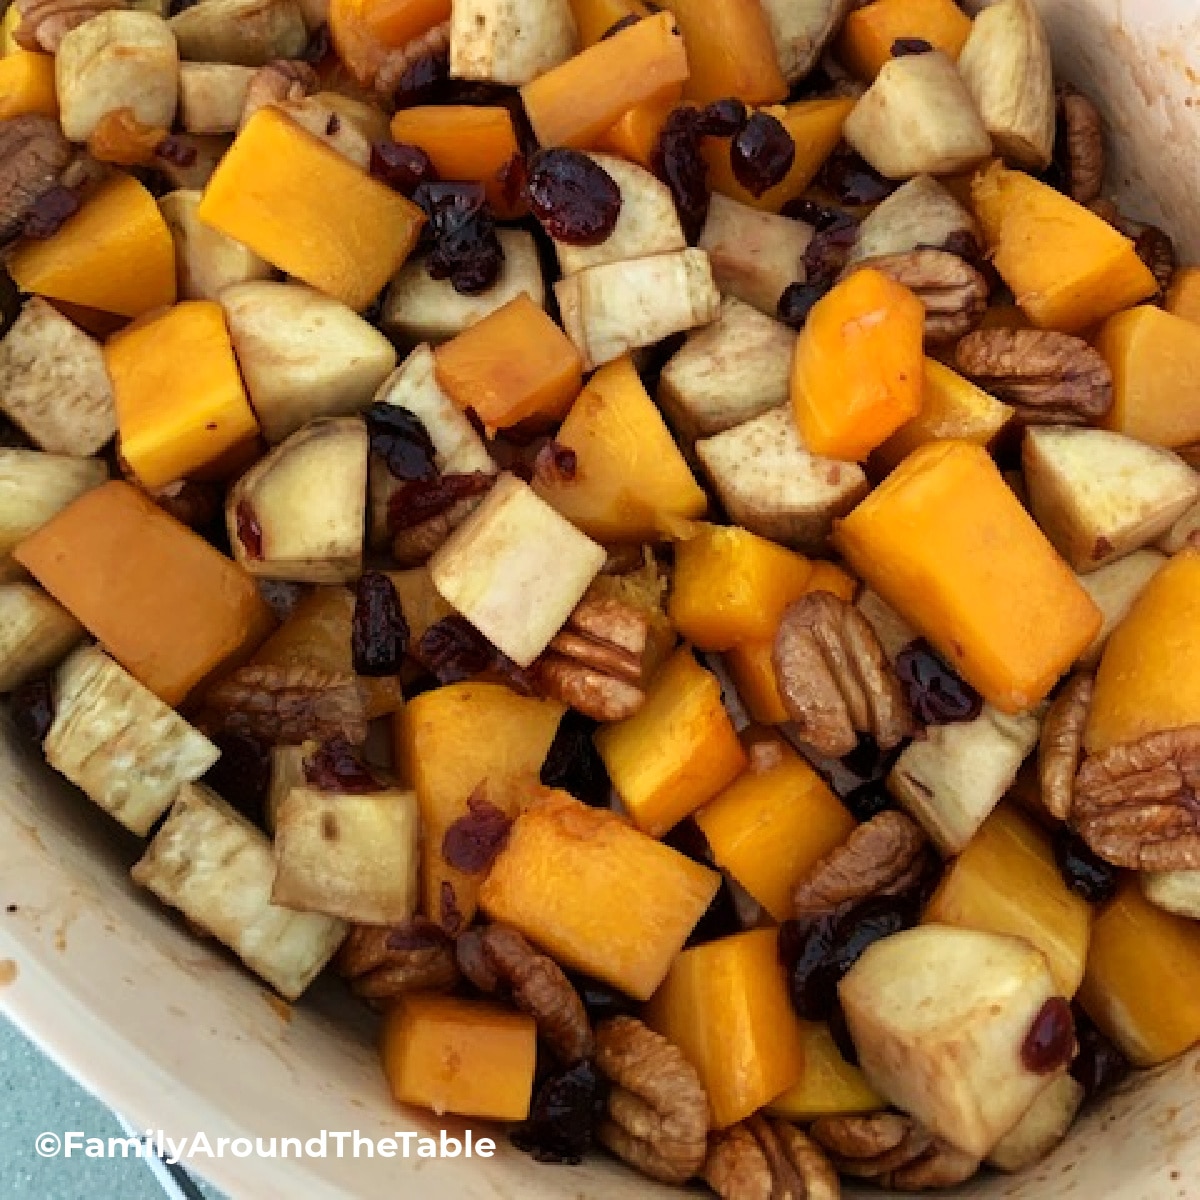 A fall vegetable medley in a baking dish with pecans.